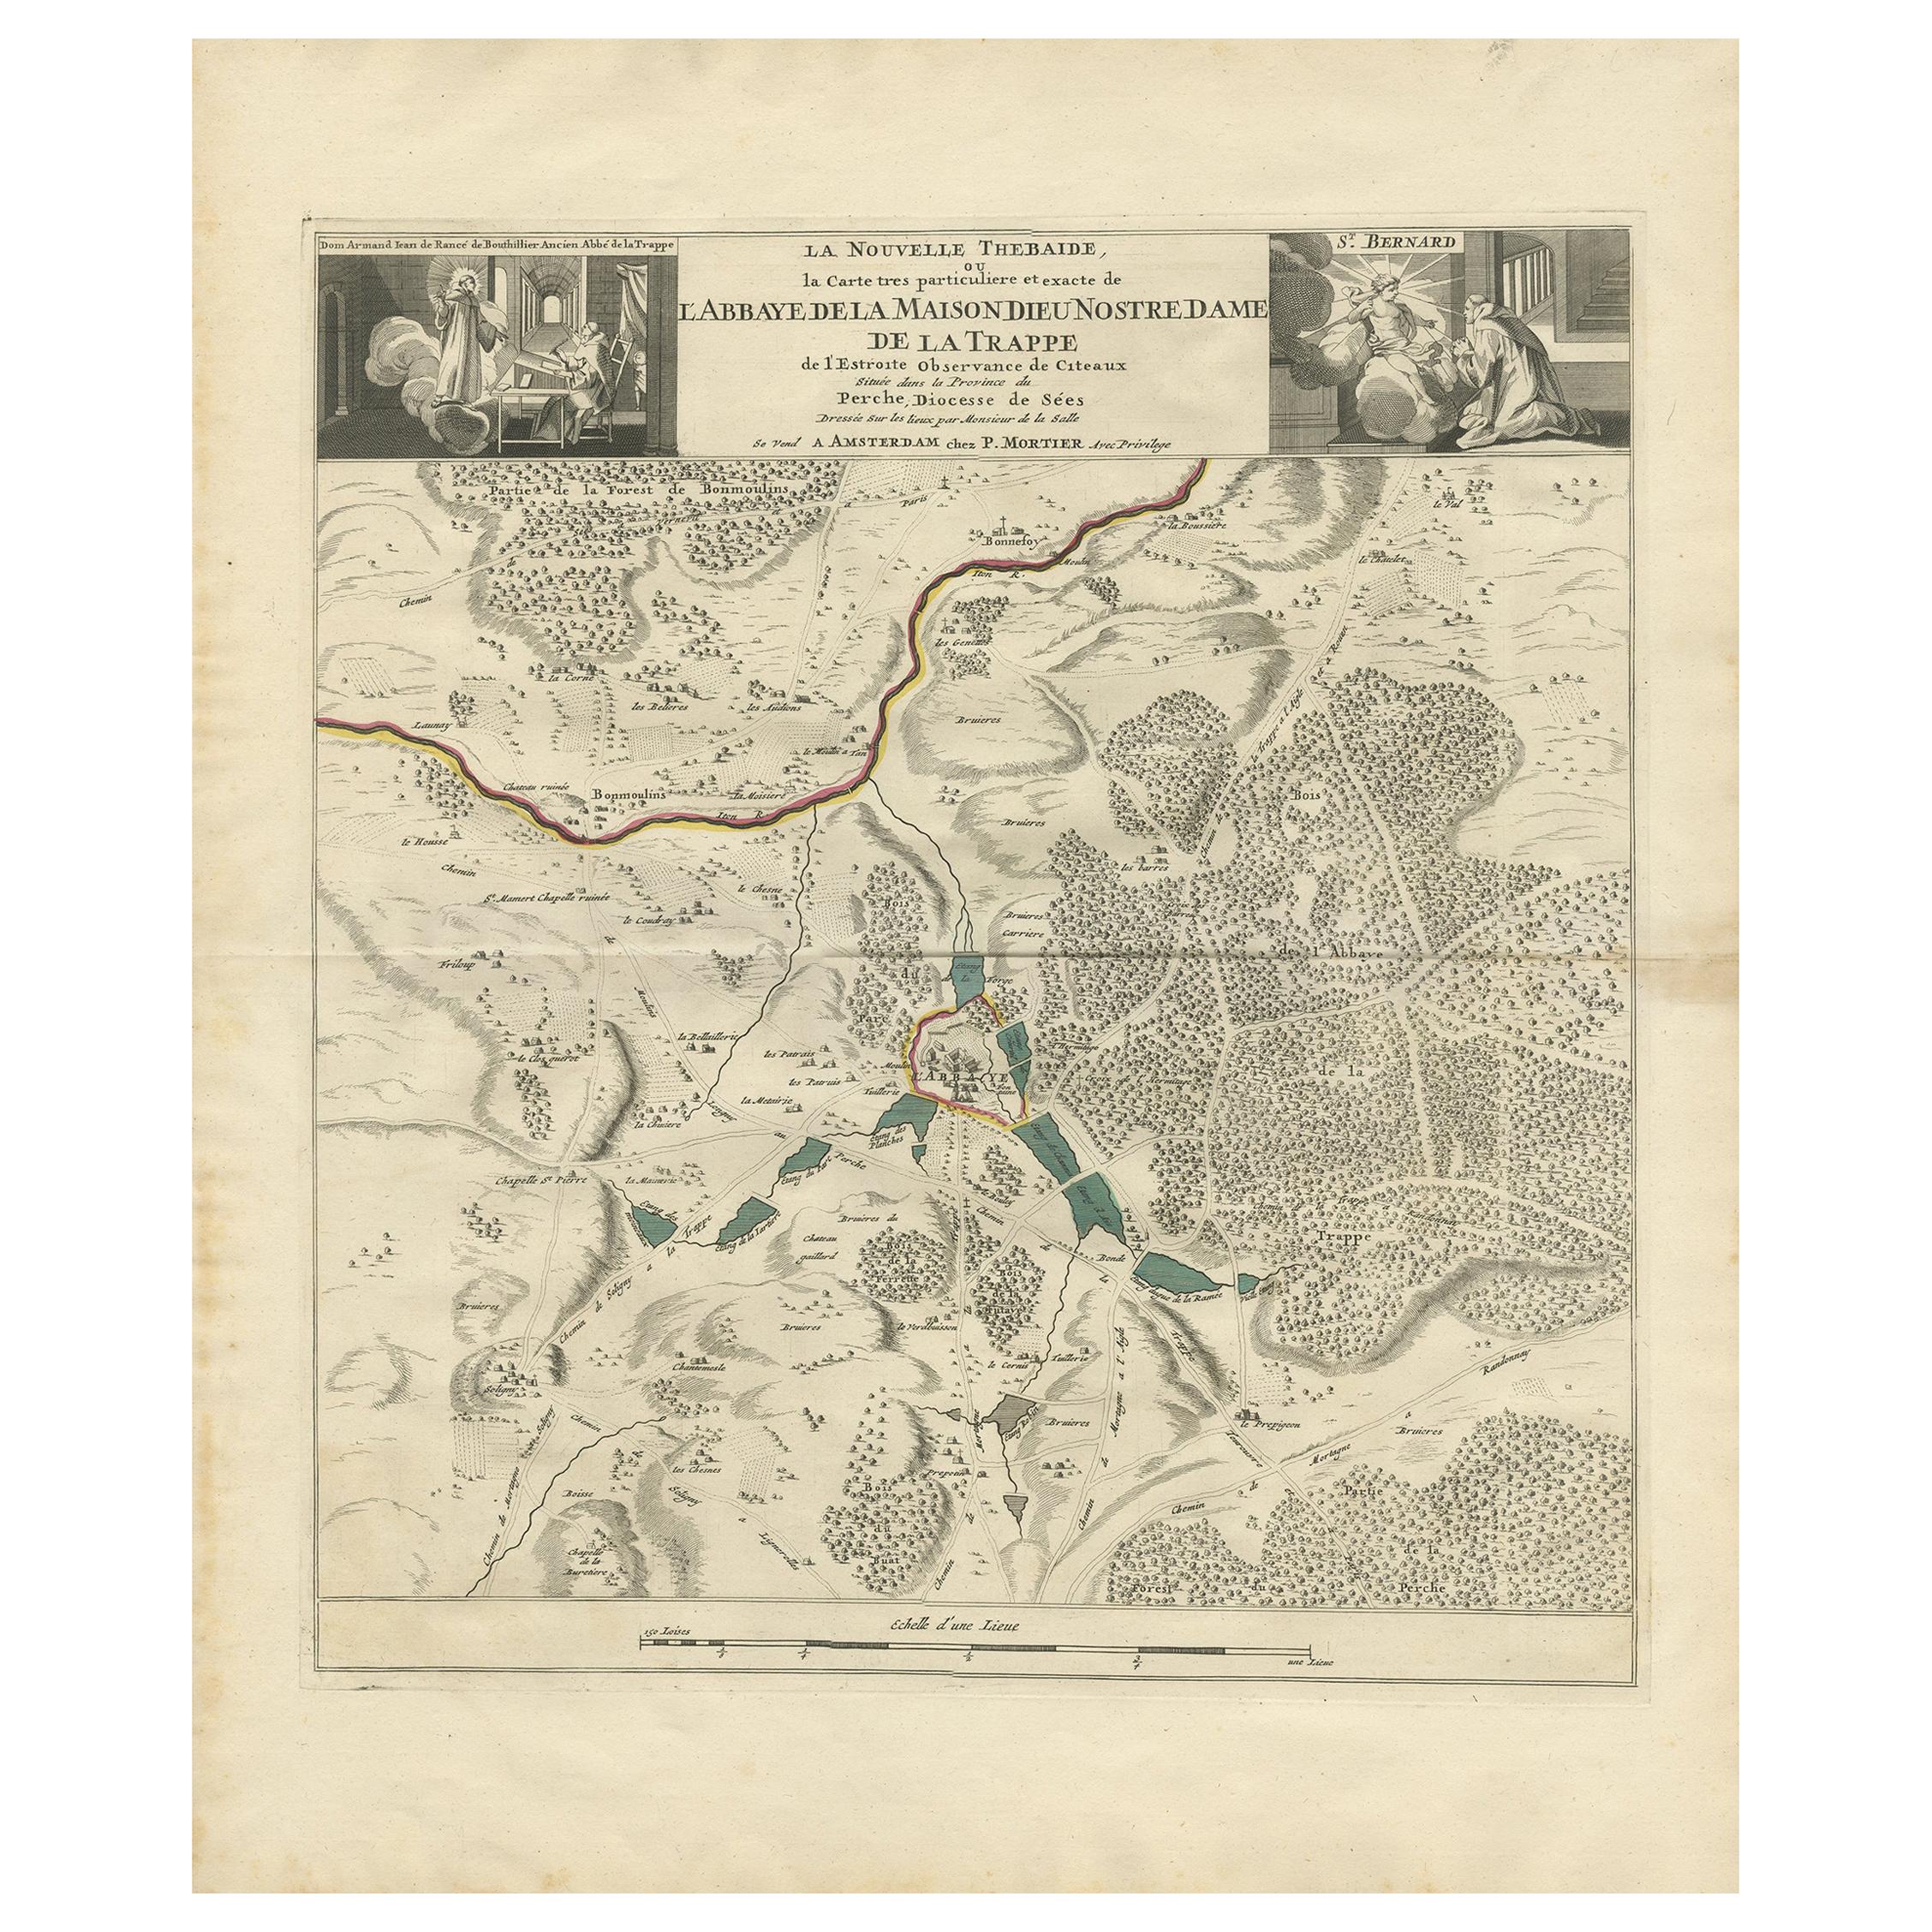 Antique Map of the Area around the Abbey in Soligny-la-Trappe 'c.1710' For Sale